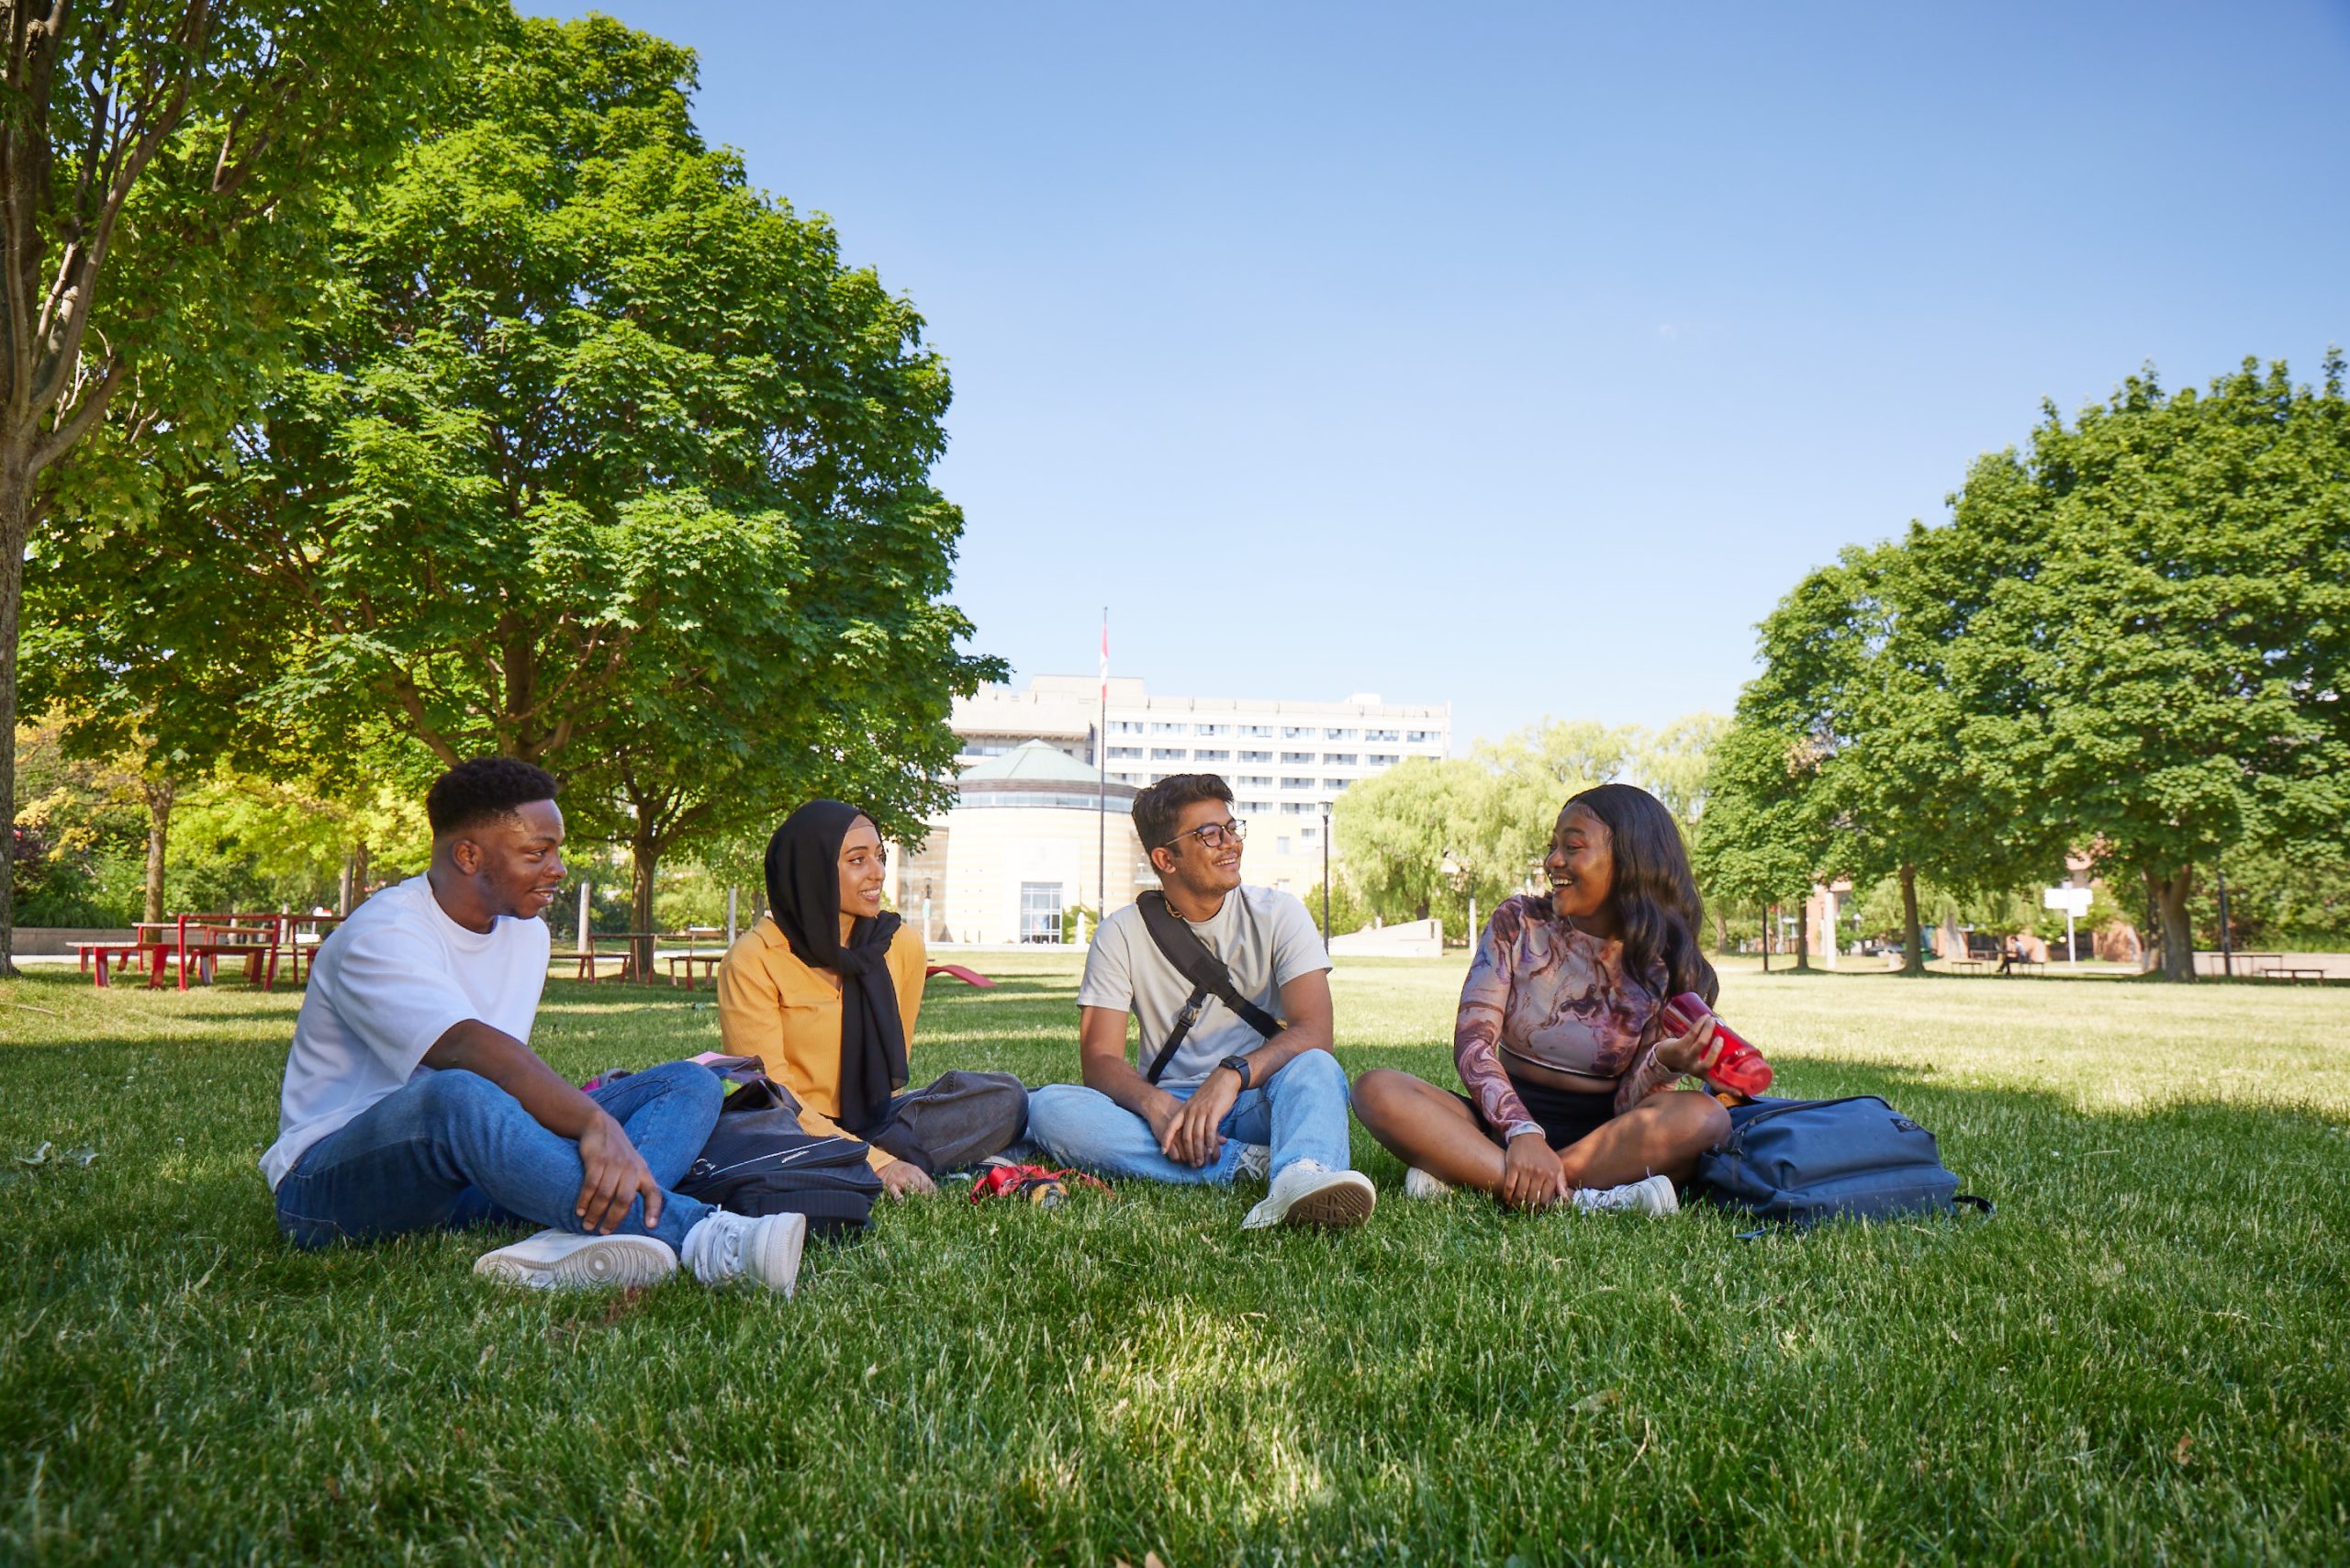 Four students sit together with backpacks in the grassy Commons